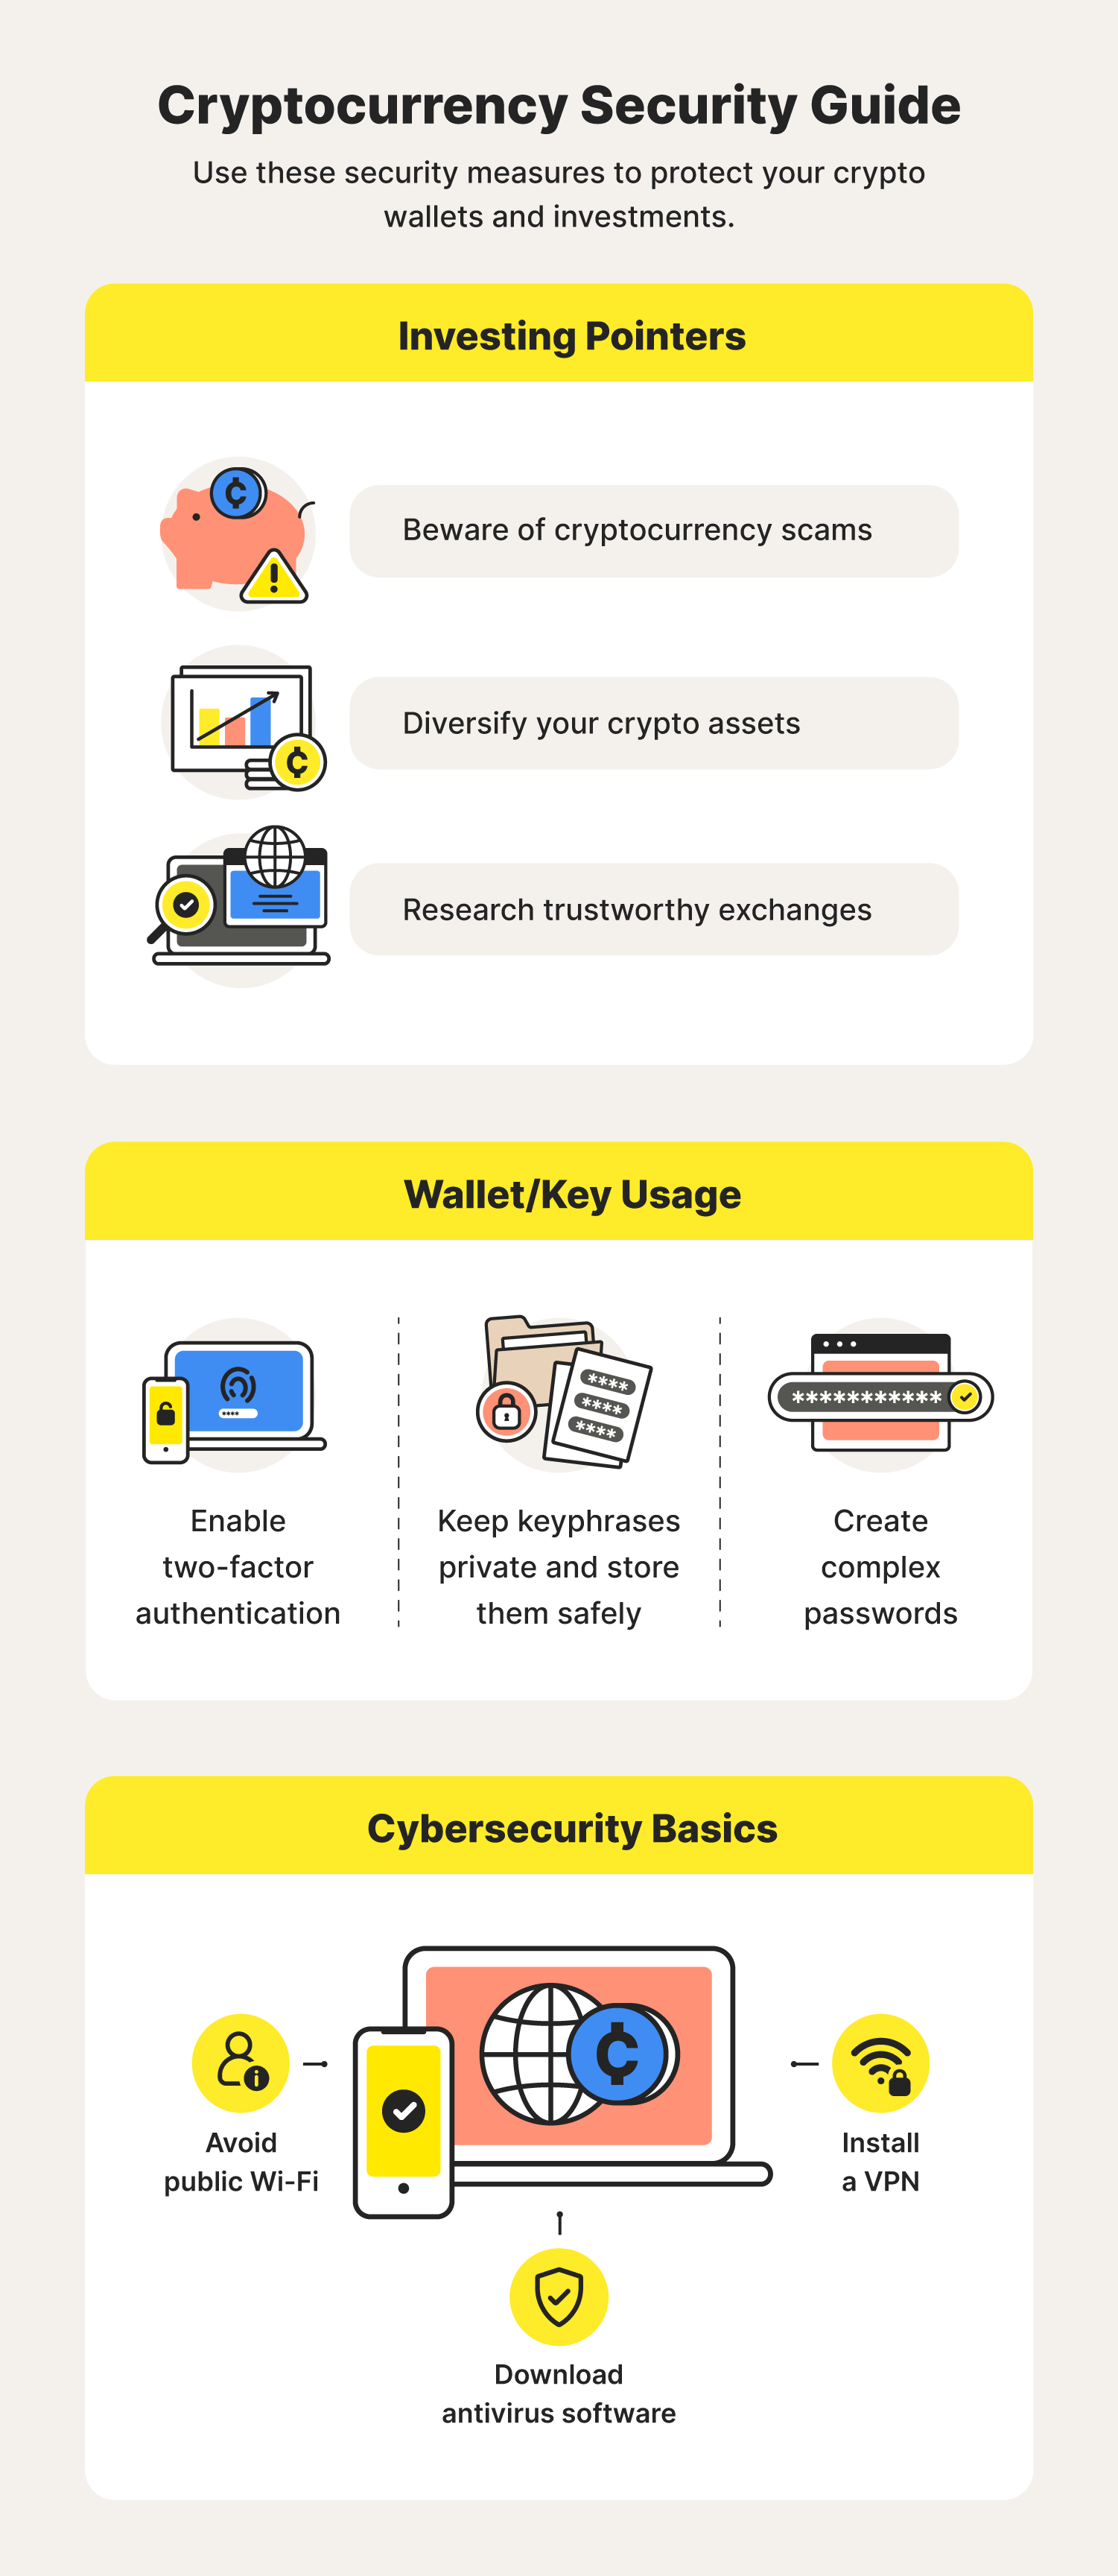 Three graphics overview cryptocurrency security tips, including investing pointers, wallet/key usage tips, and cybersecurity basics to consider.